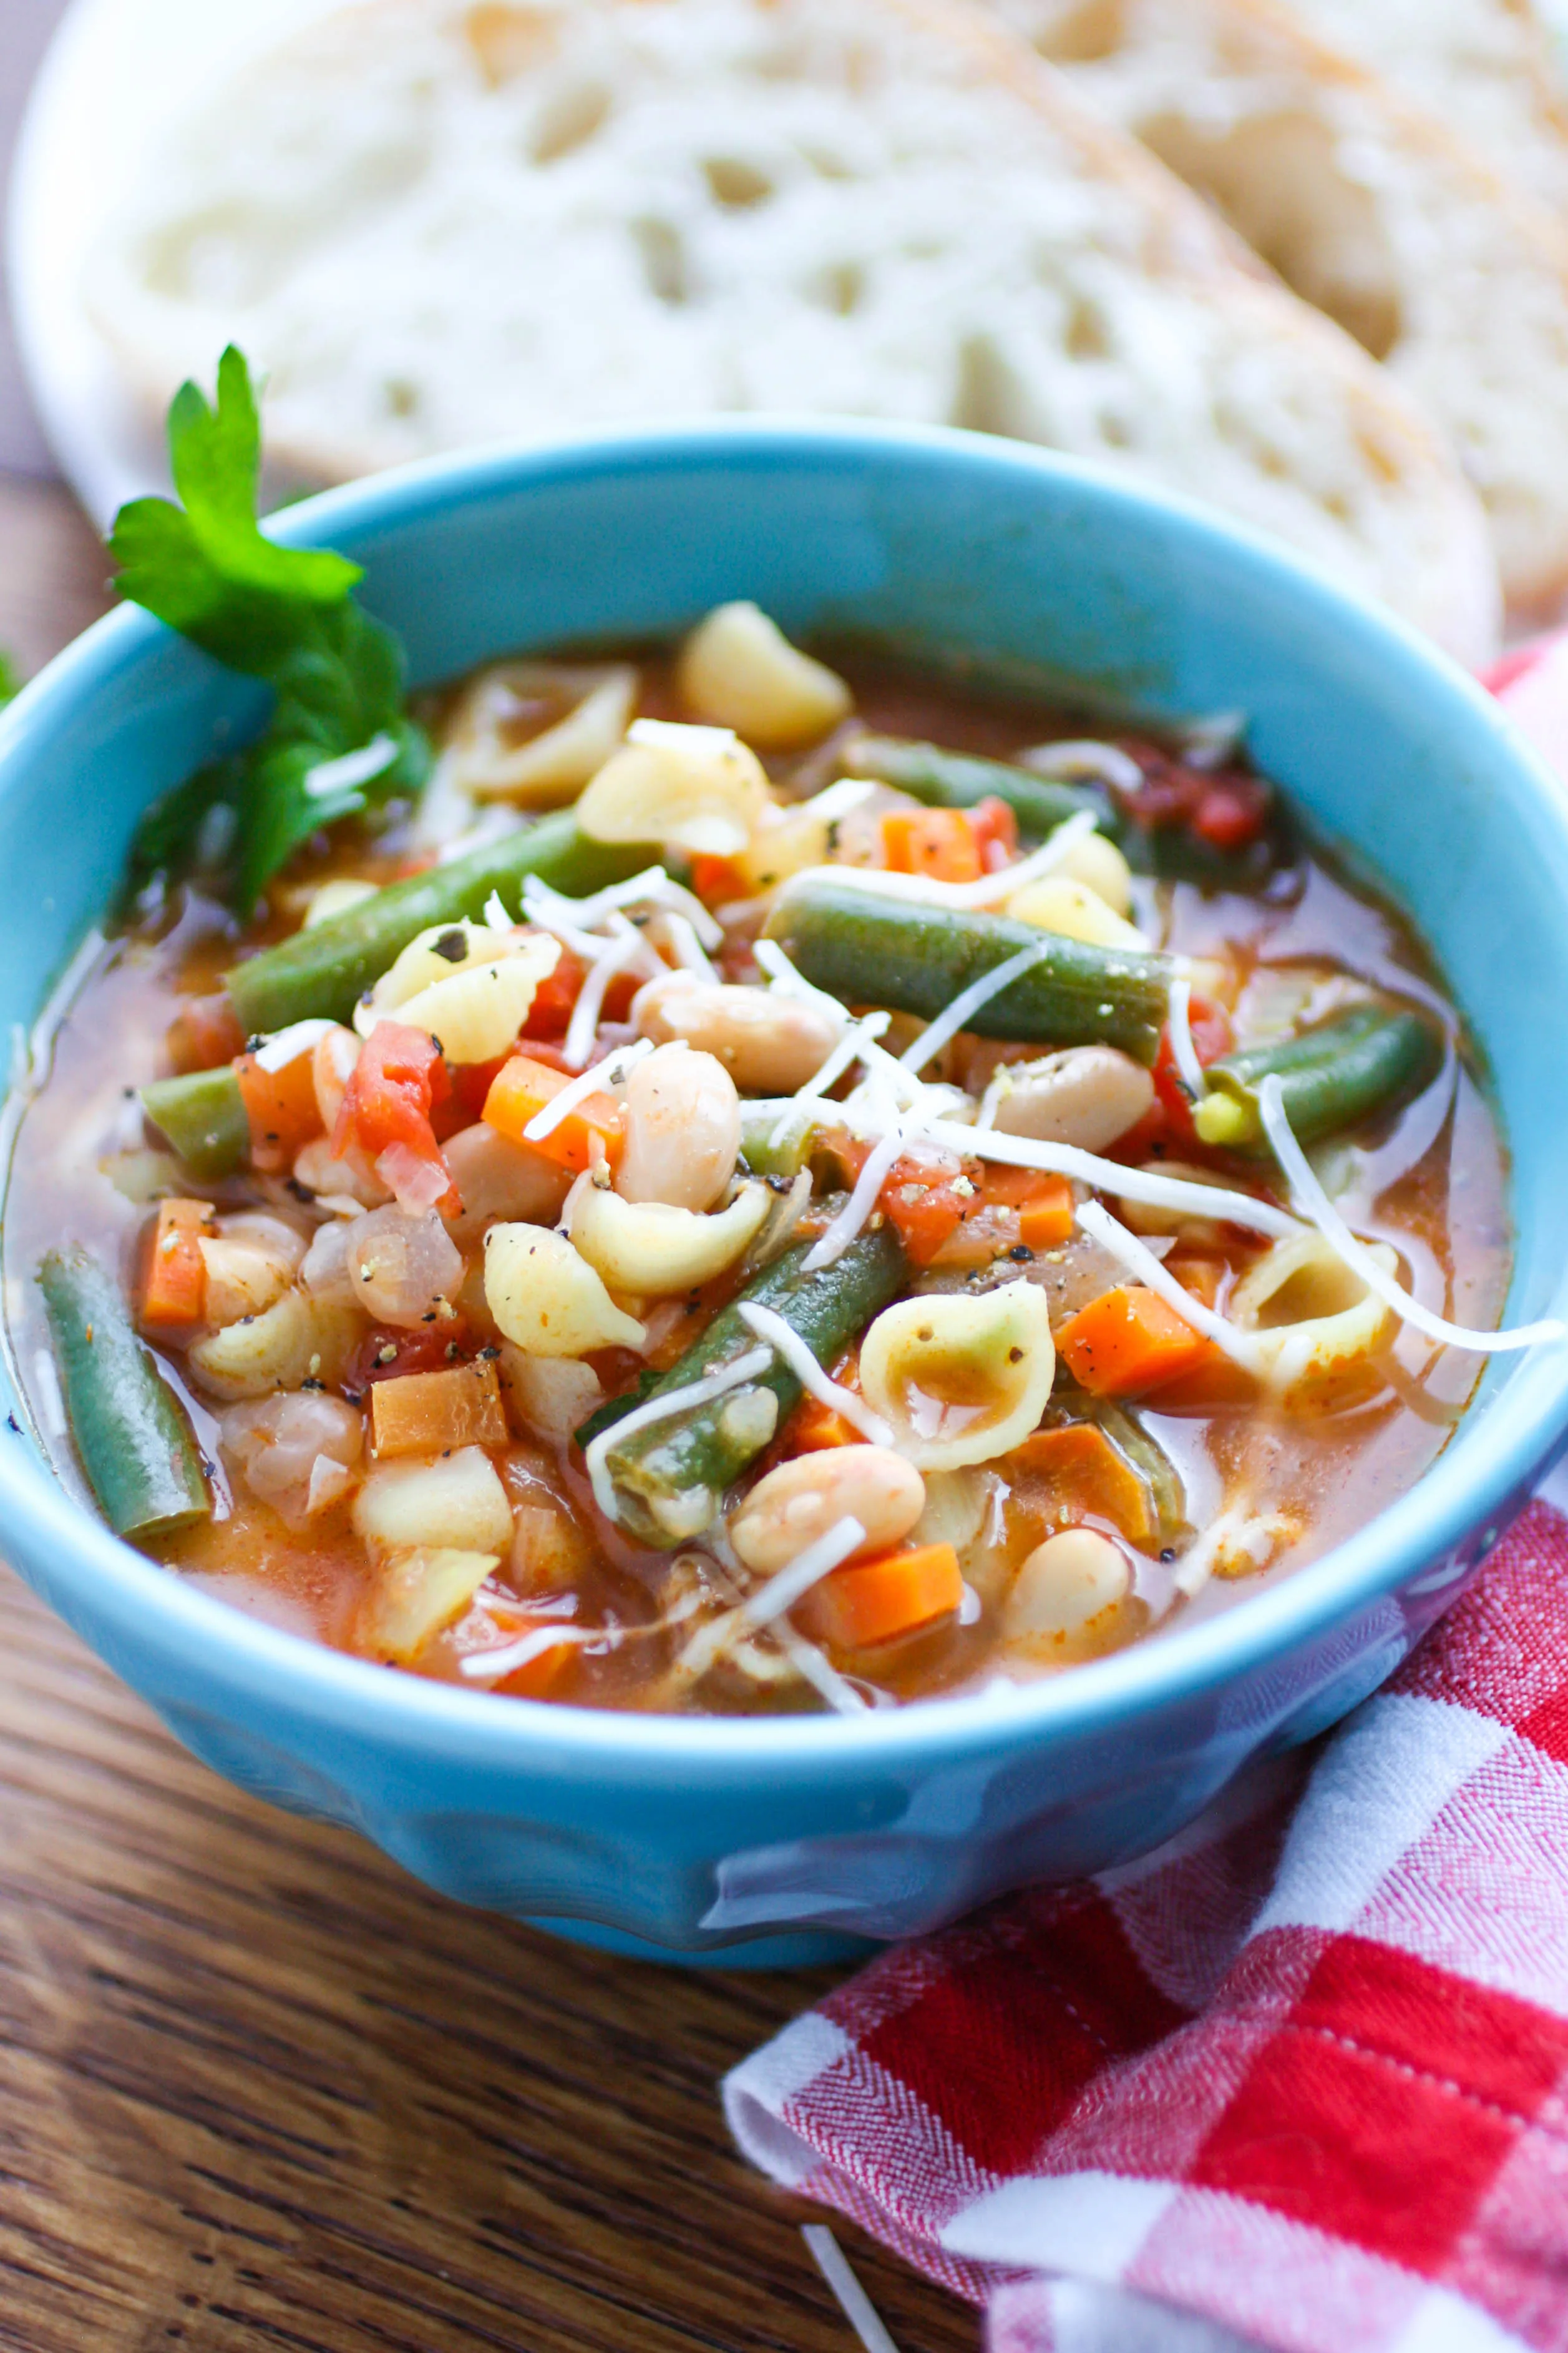 Minestrone soup is super filling and delicious. You'll love minestrone soup when you want a filling and flavorful dish.